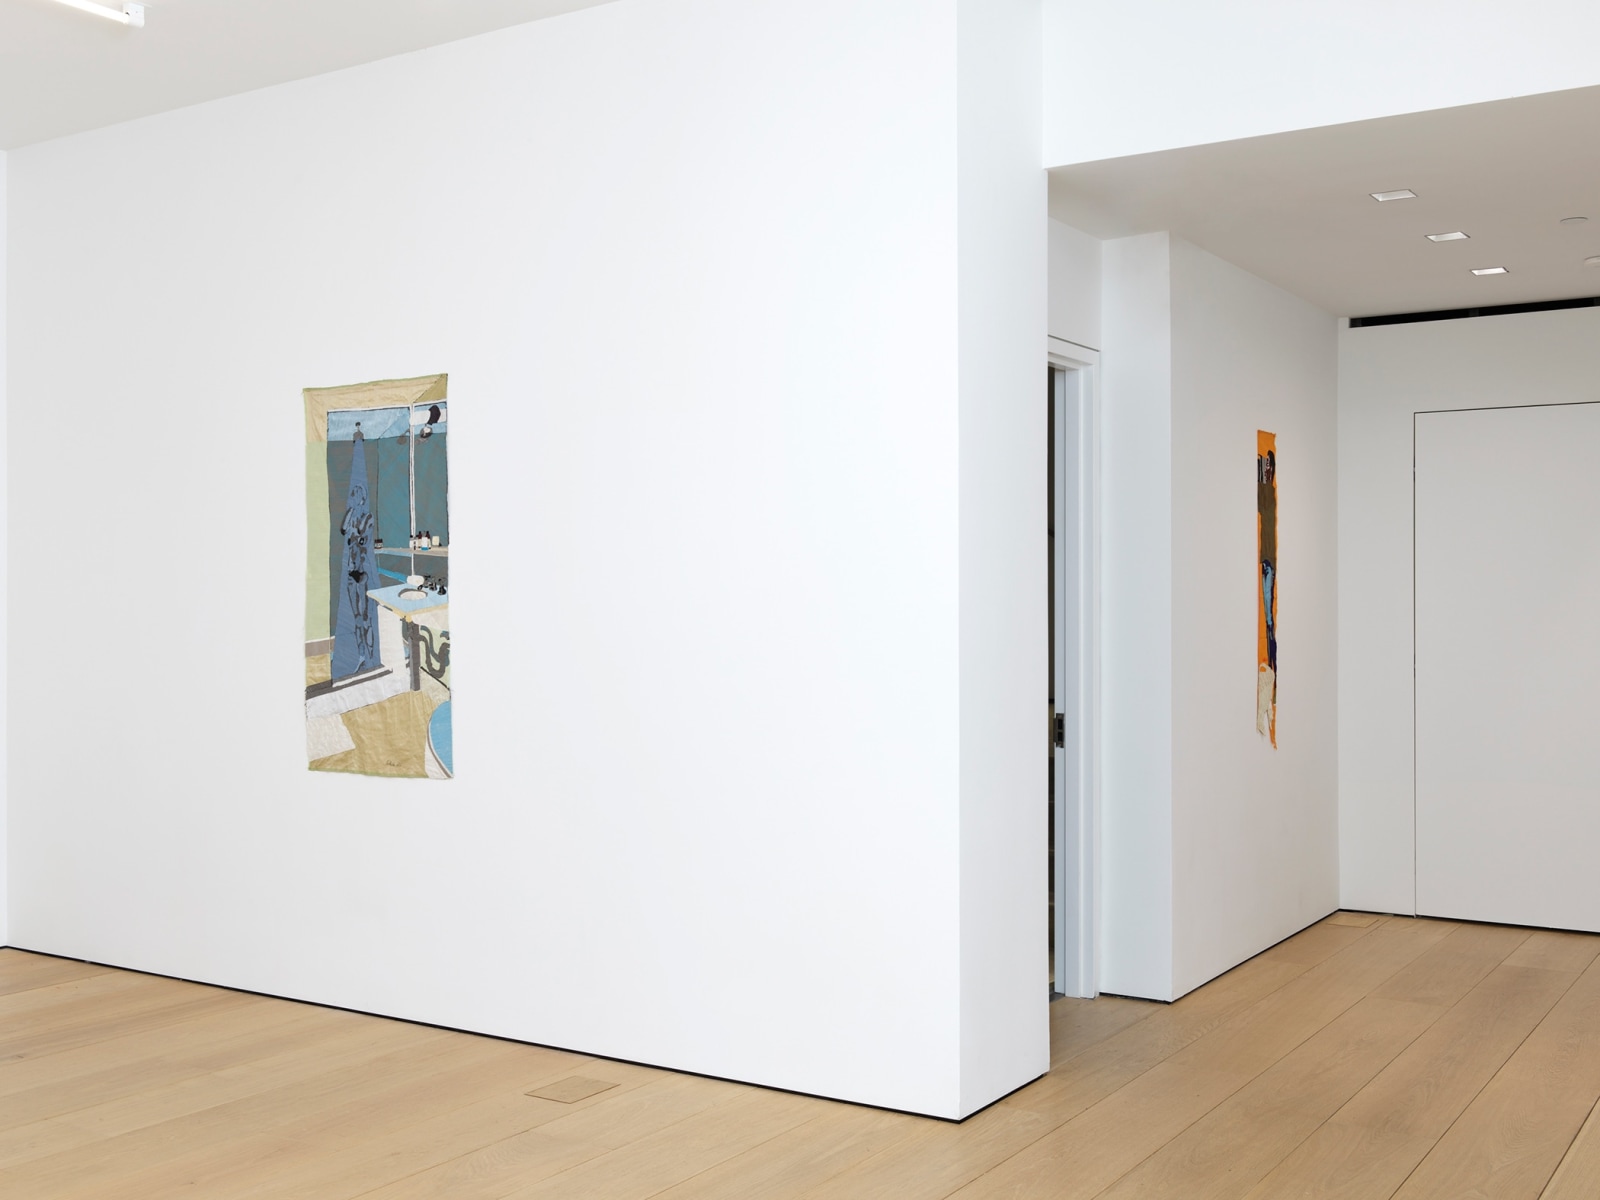 Seventh installation view of the exhibition Billie Zangewa: Wings of Change at Lehmann Maupin in New York